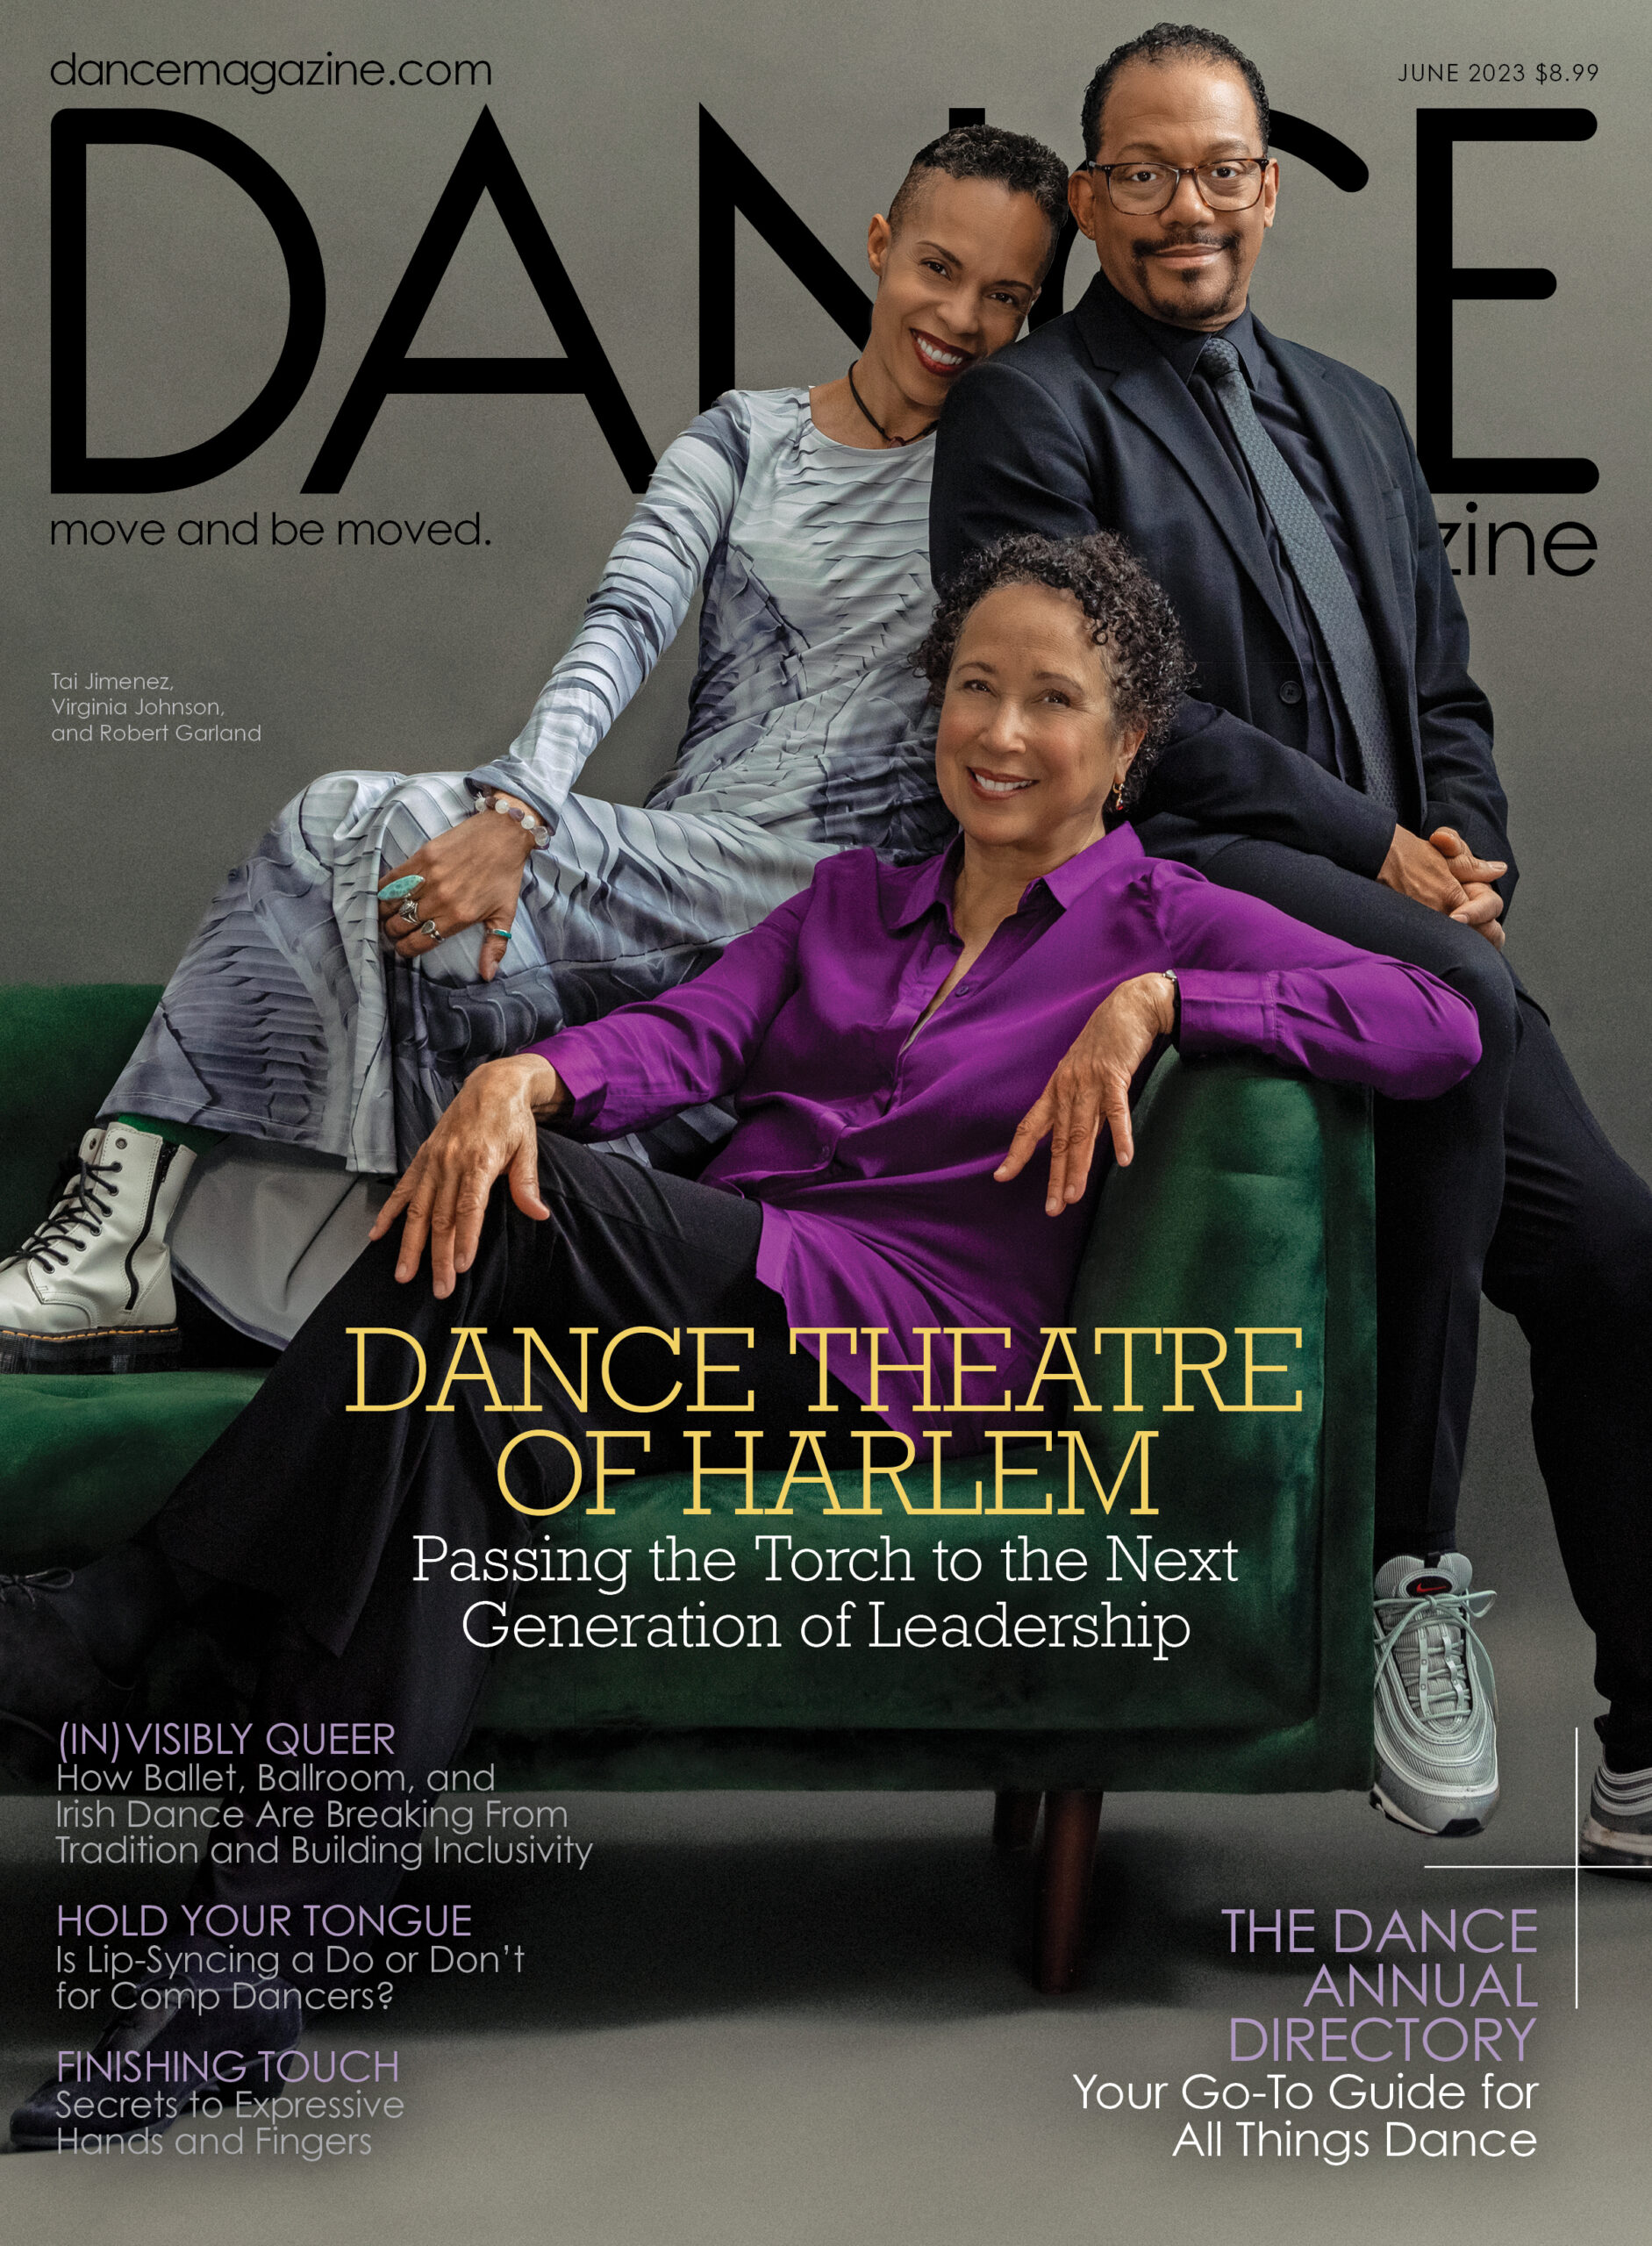 The cover of the June 2023 issue of Dance Magazine. Virginia Johnson, Robert Garland, and Tai Jimenez perch on a green velvet couch, smiling at the camera. Tai leans her cheek against Robert's shoulder, while seated below them Virginia exudes elegance and warmth. The cover line reads, "Dance Theatre of Harlem: Passing the Torch to the Next Generation of Leadership."